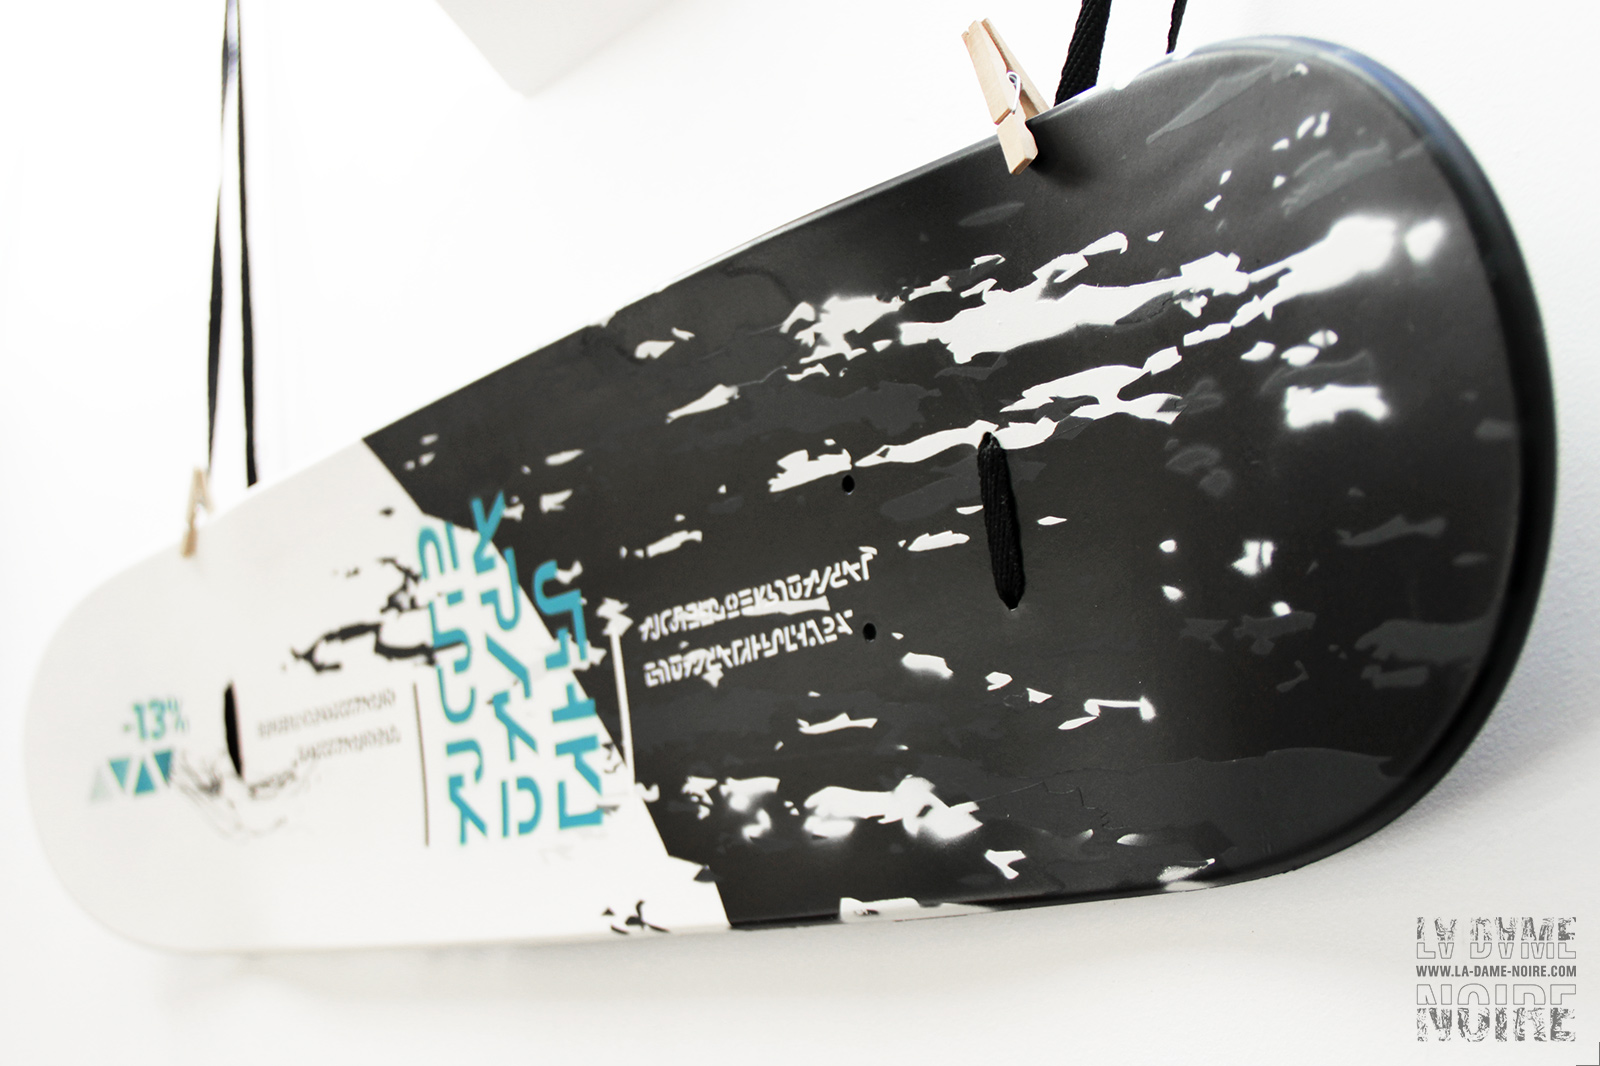 Details of the skateboard with black background and white shapes